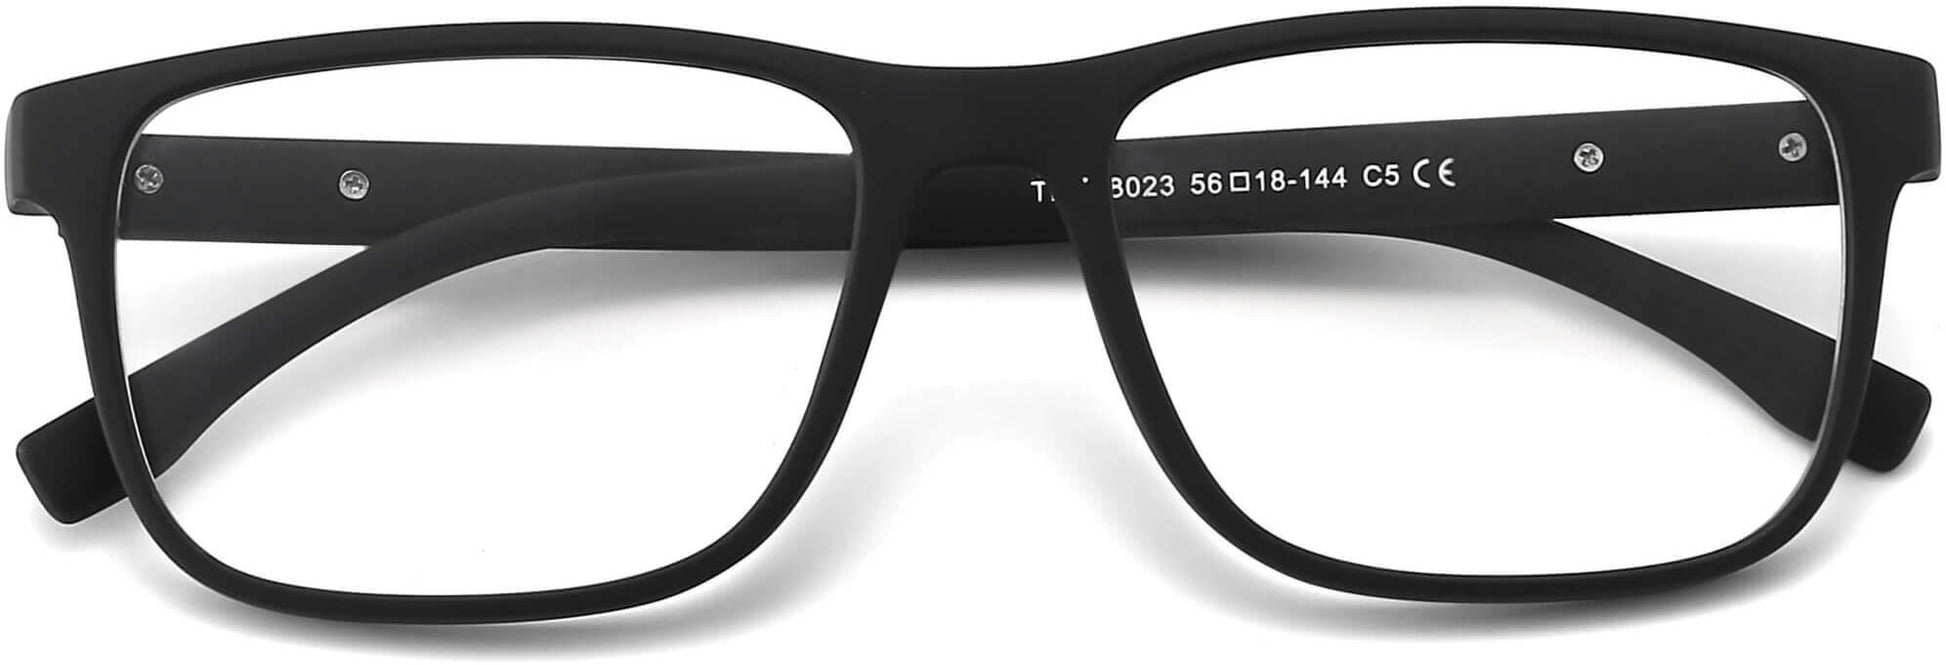 Martin Rectangle Black Eyeglasses from ANRRI, closed view